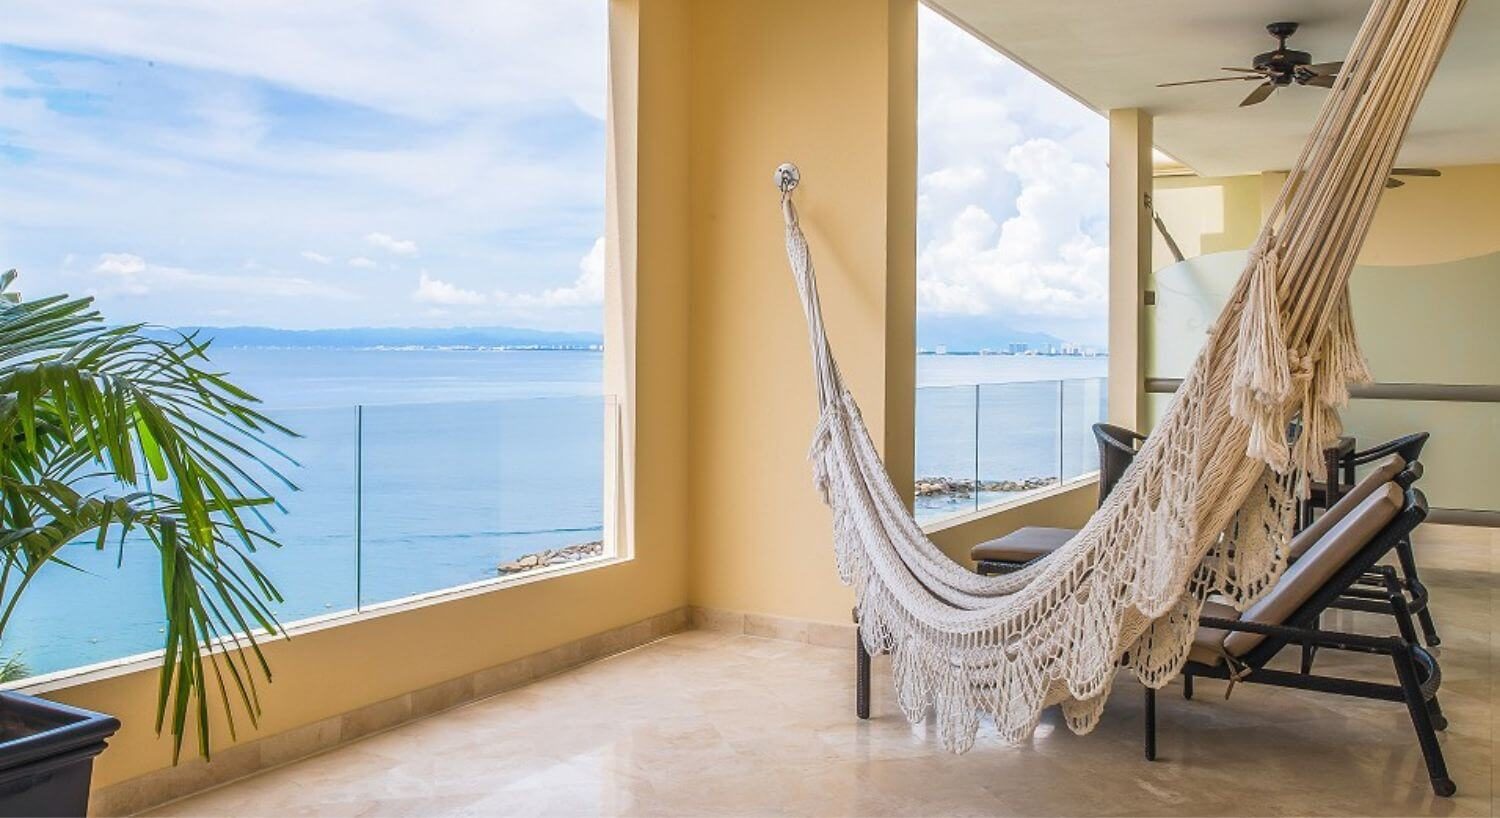 A private outdoor balcony with 2 brown lounge chairs, an outdoor dining table and chairs, a hammock, and ocean views.